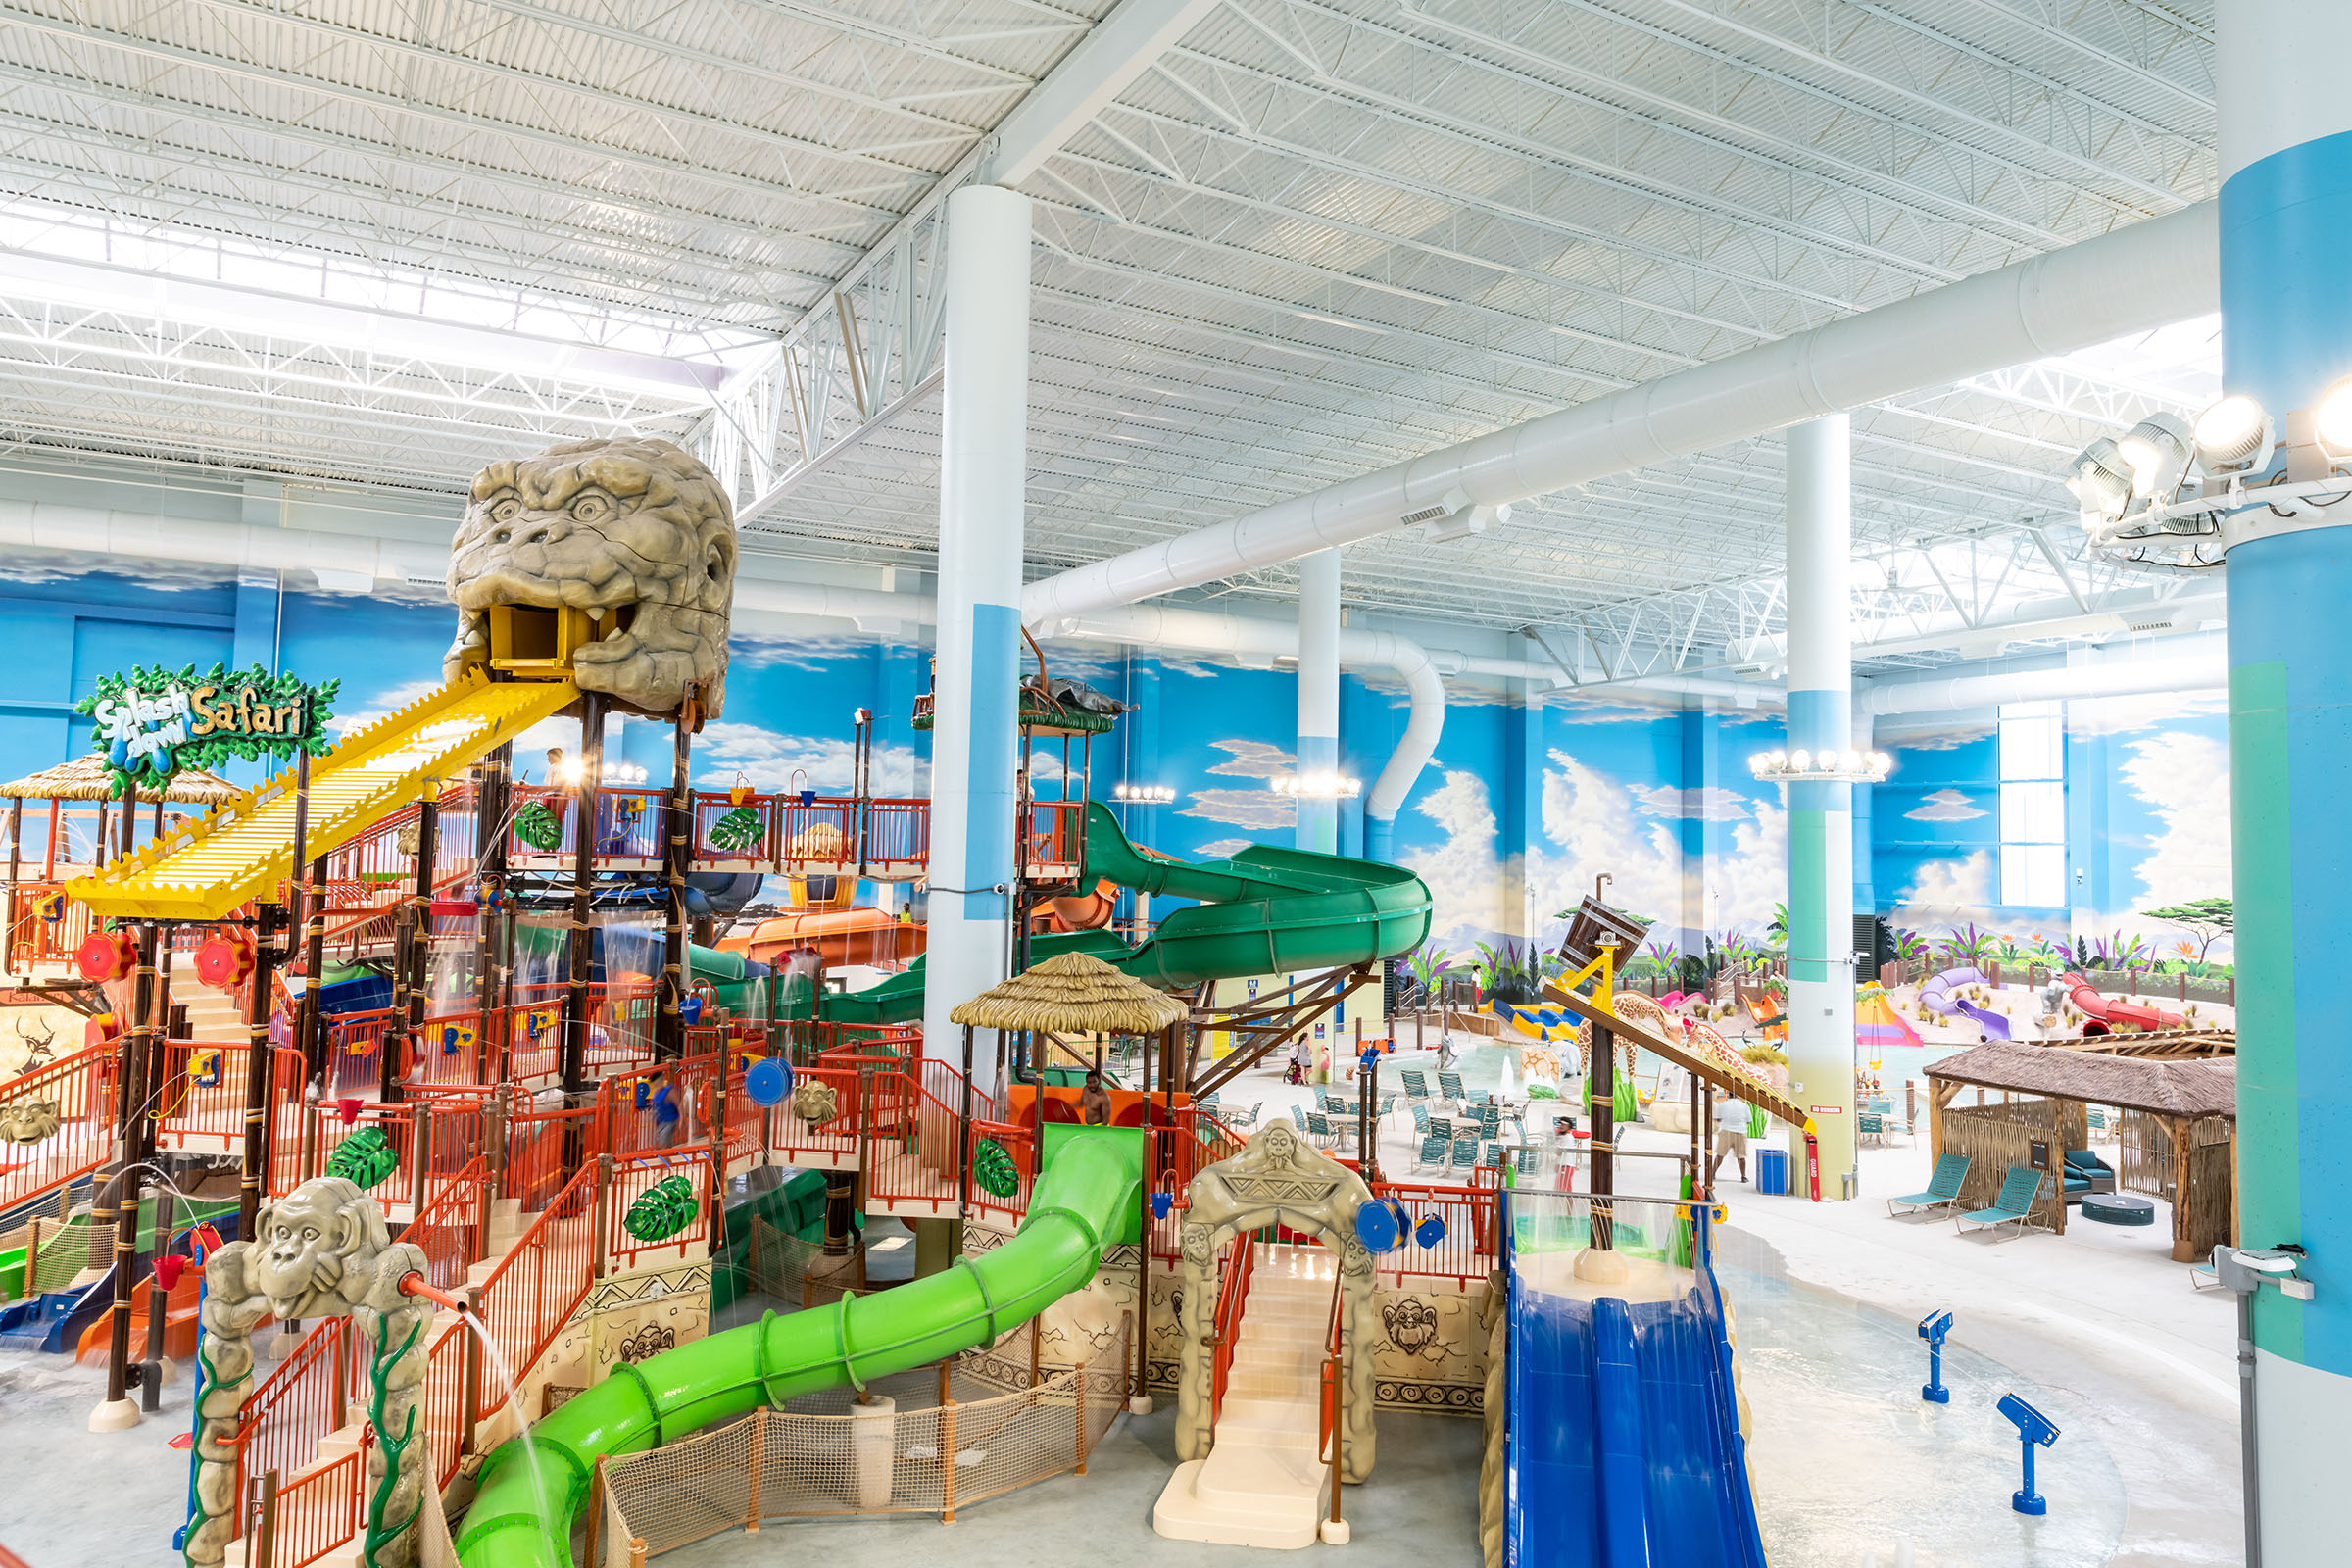 One of the large activity areas featuring slides at the new Kalahari Resort in Round Rock. Photo courtesy of Kalahari Resorts and Conventions. 